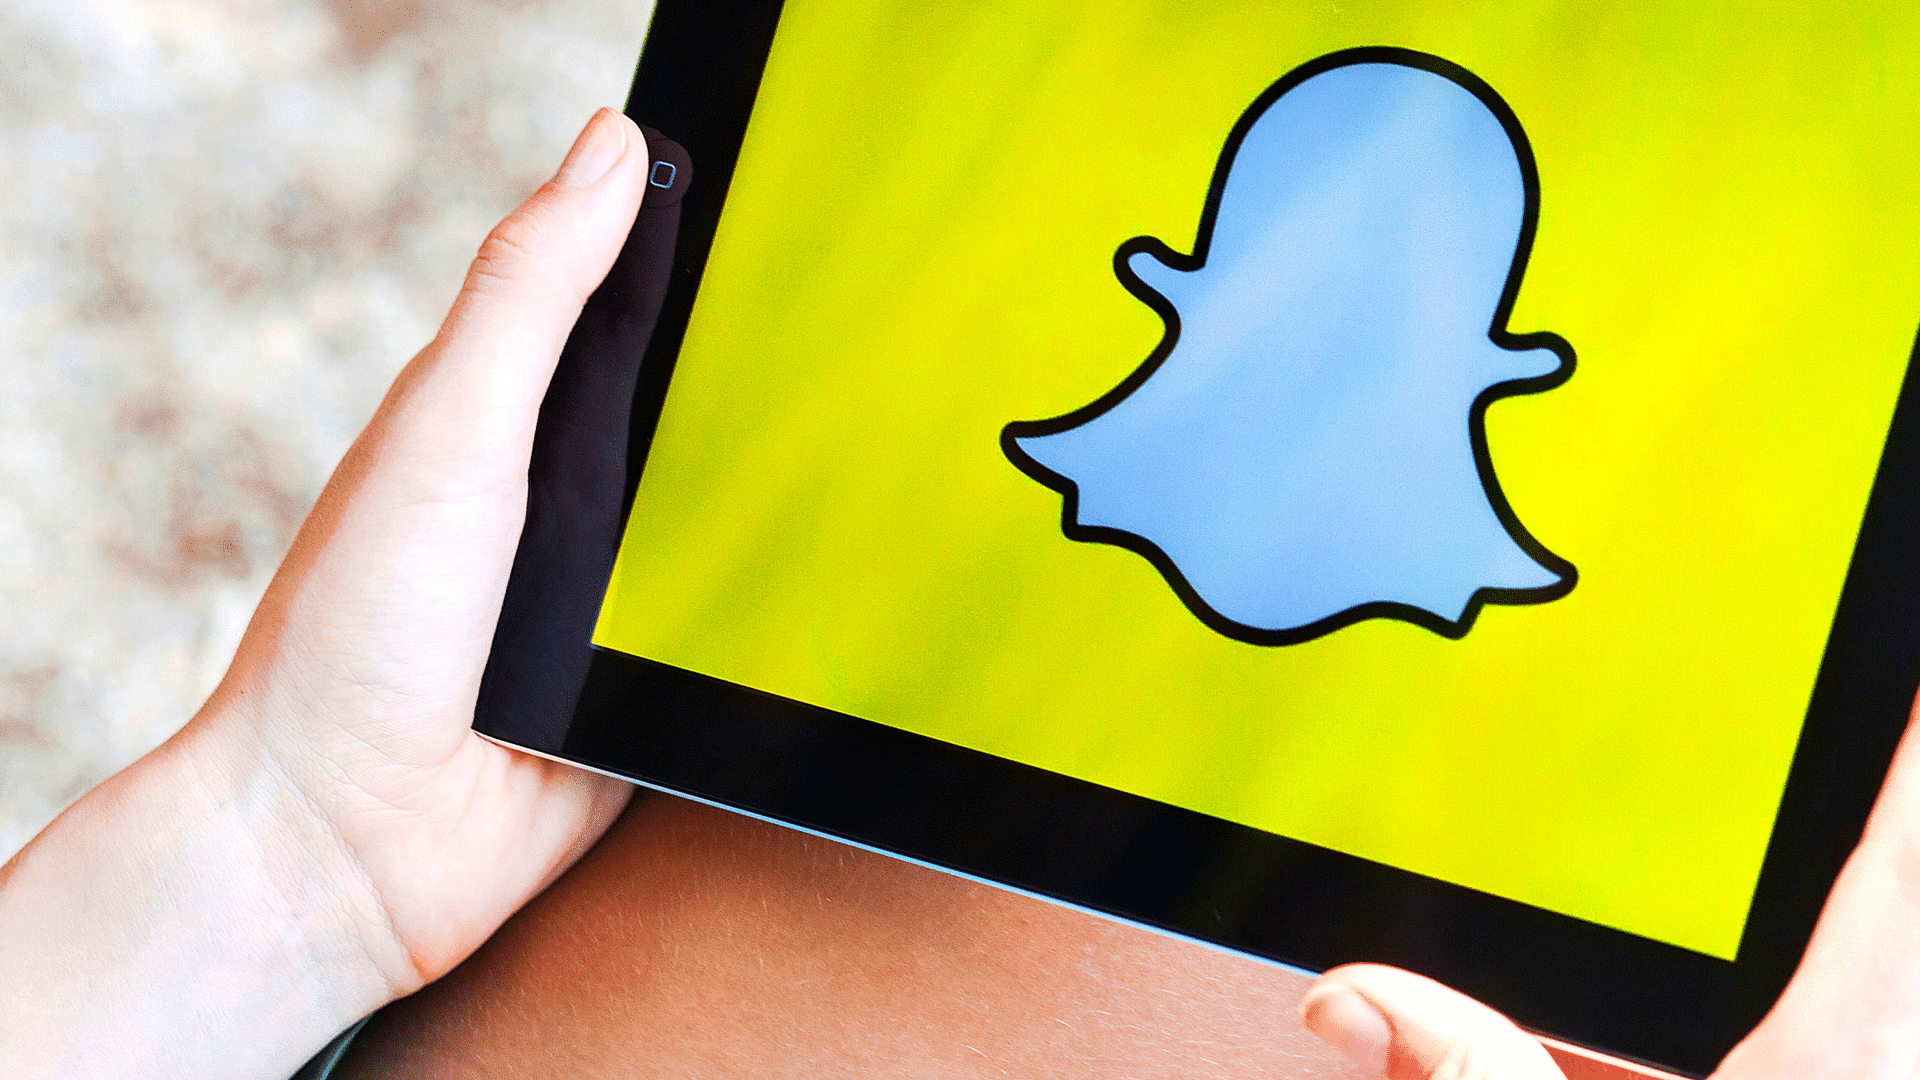 A lot of technology and effort goes into making Snapchat what it is! (Photo: istockphoto)